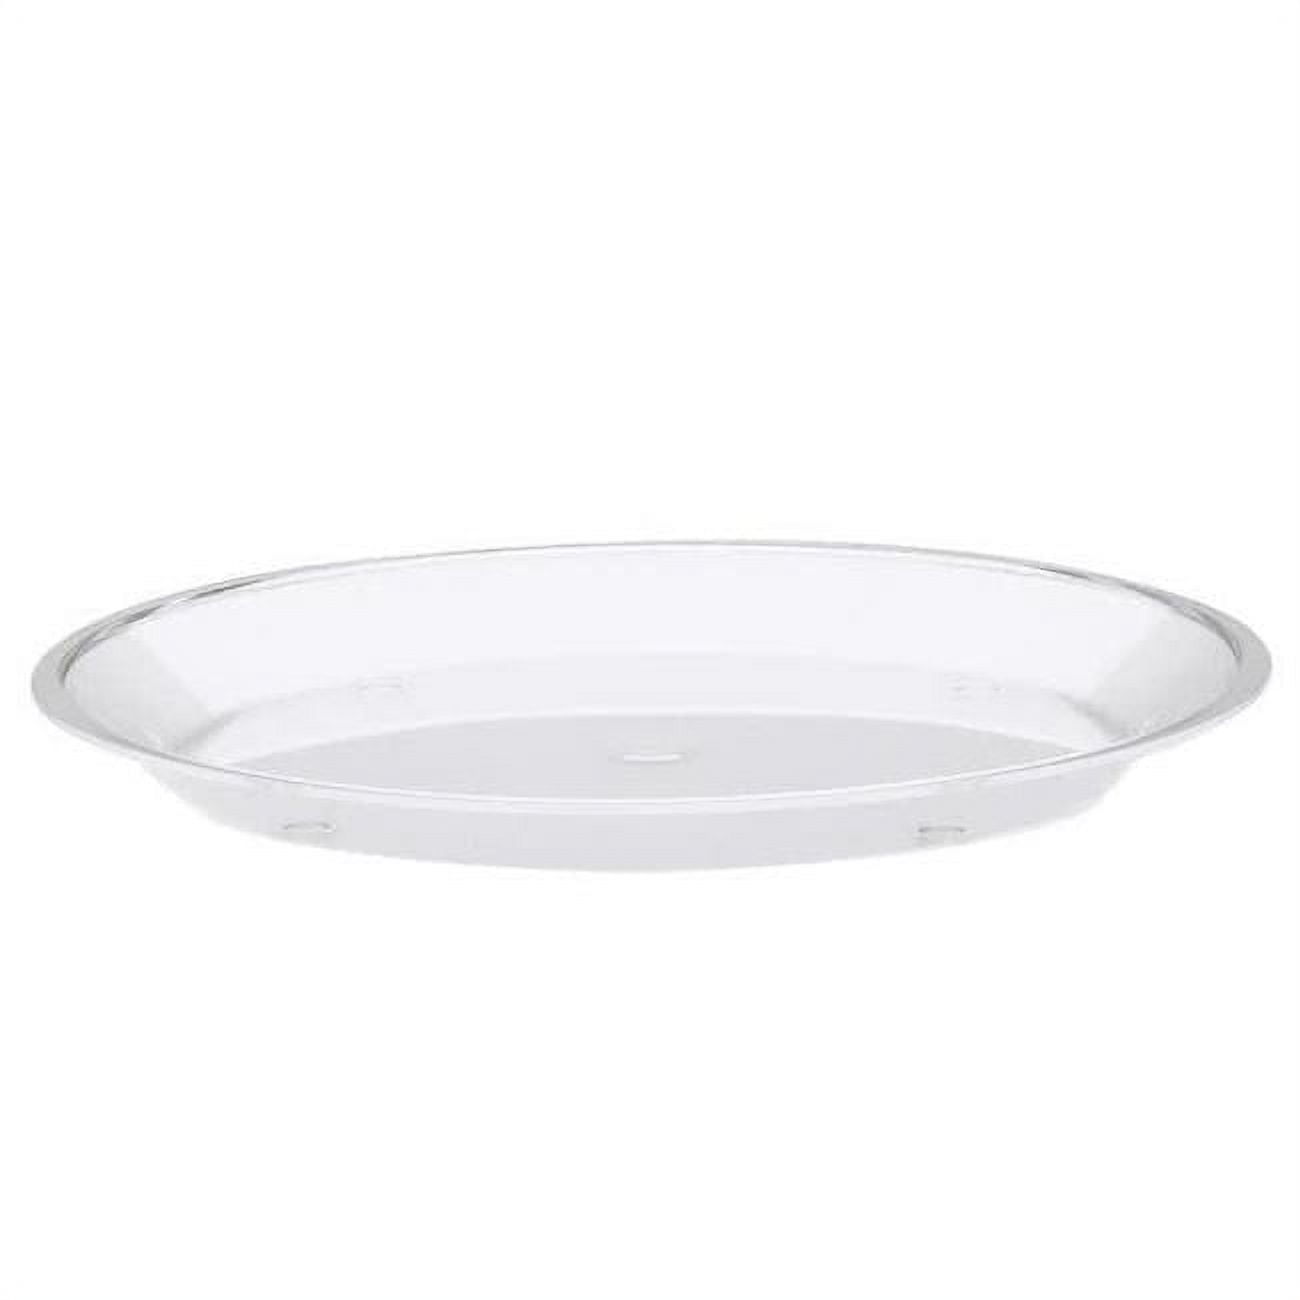 Picture of Cal Mil 315-15-12 15 Round Shallow Tray - Clear